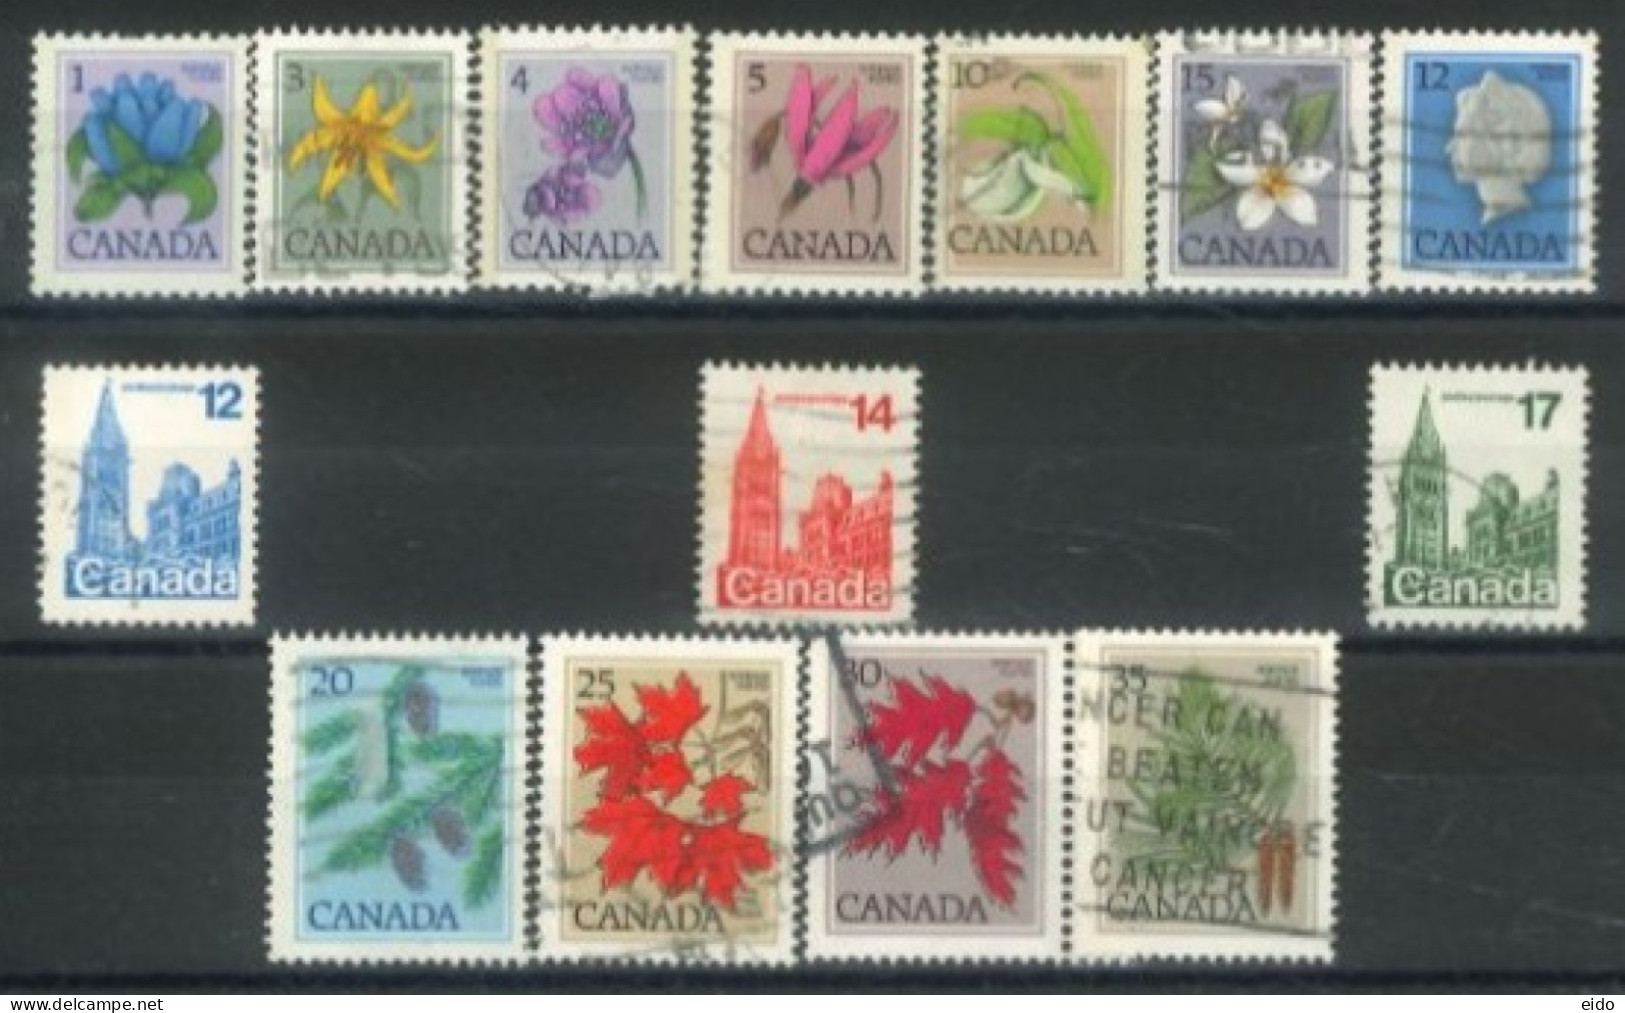 CANADA - 1977, QUEEN ELIZABETH II, HOUSE OF PARLIAMENT, FLOWERS & LEAVES STAMPS SET OF 14, USED. - Oblitérés